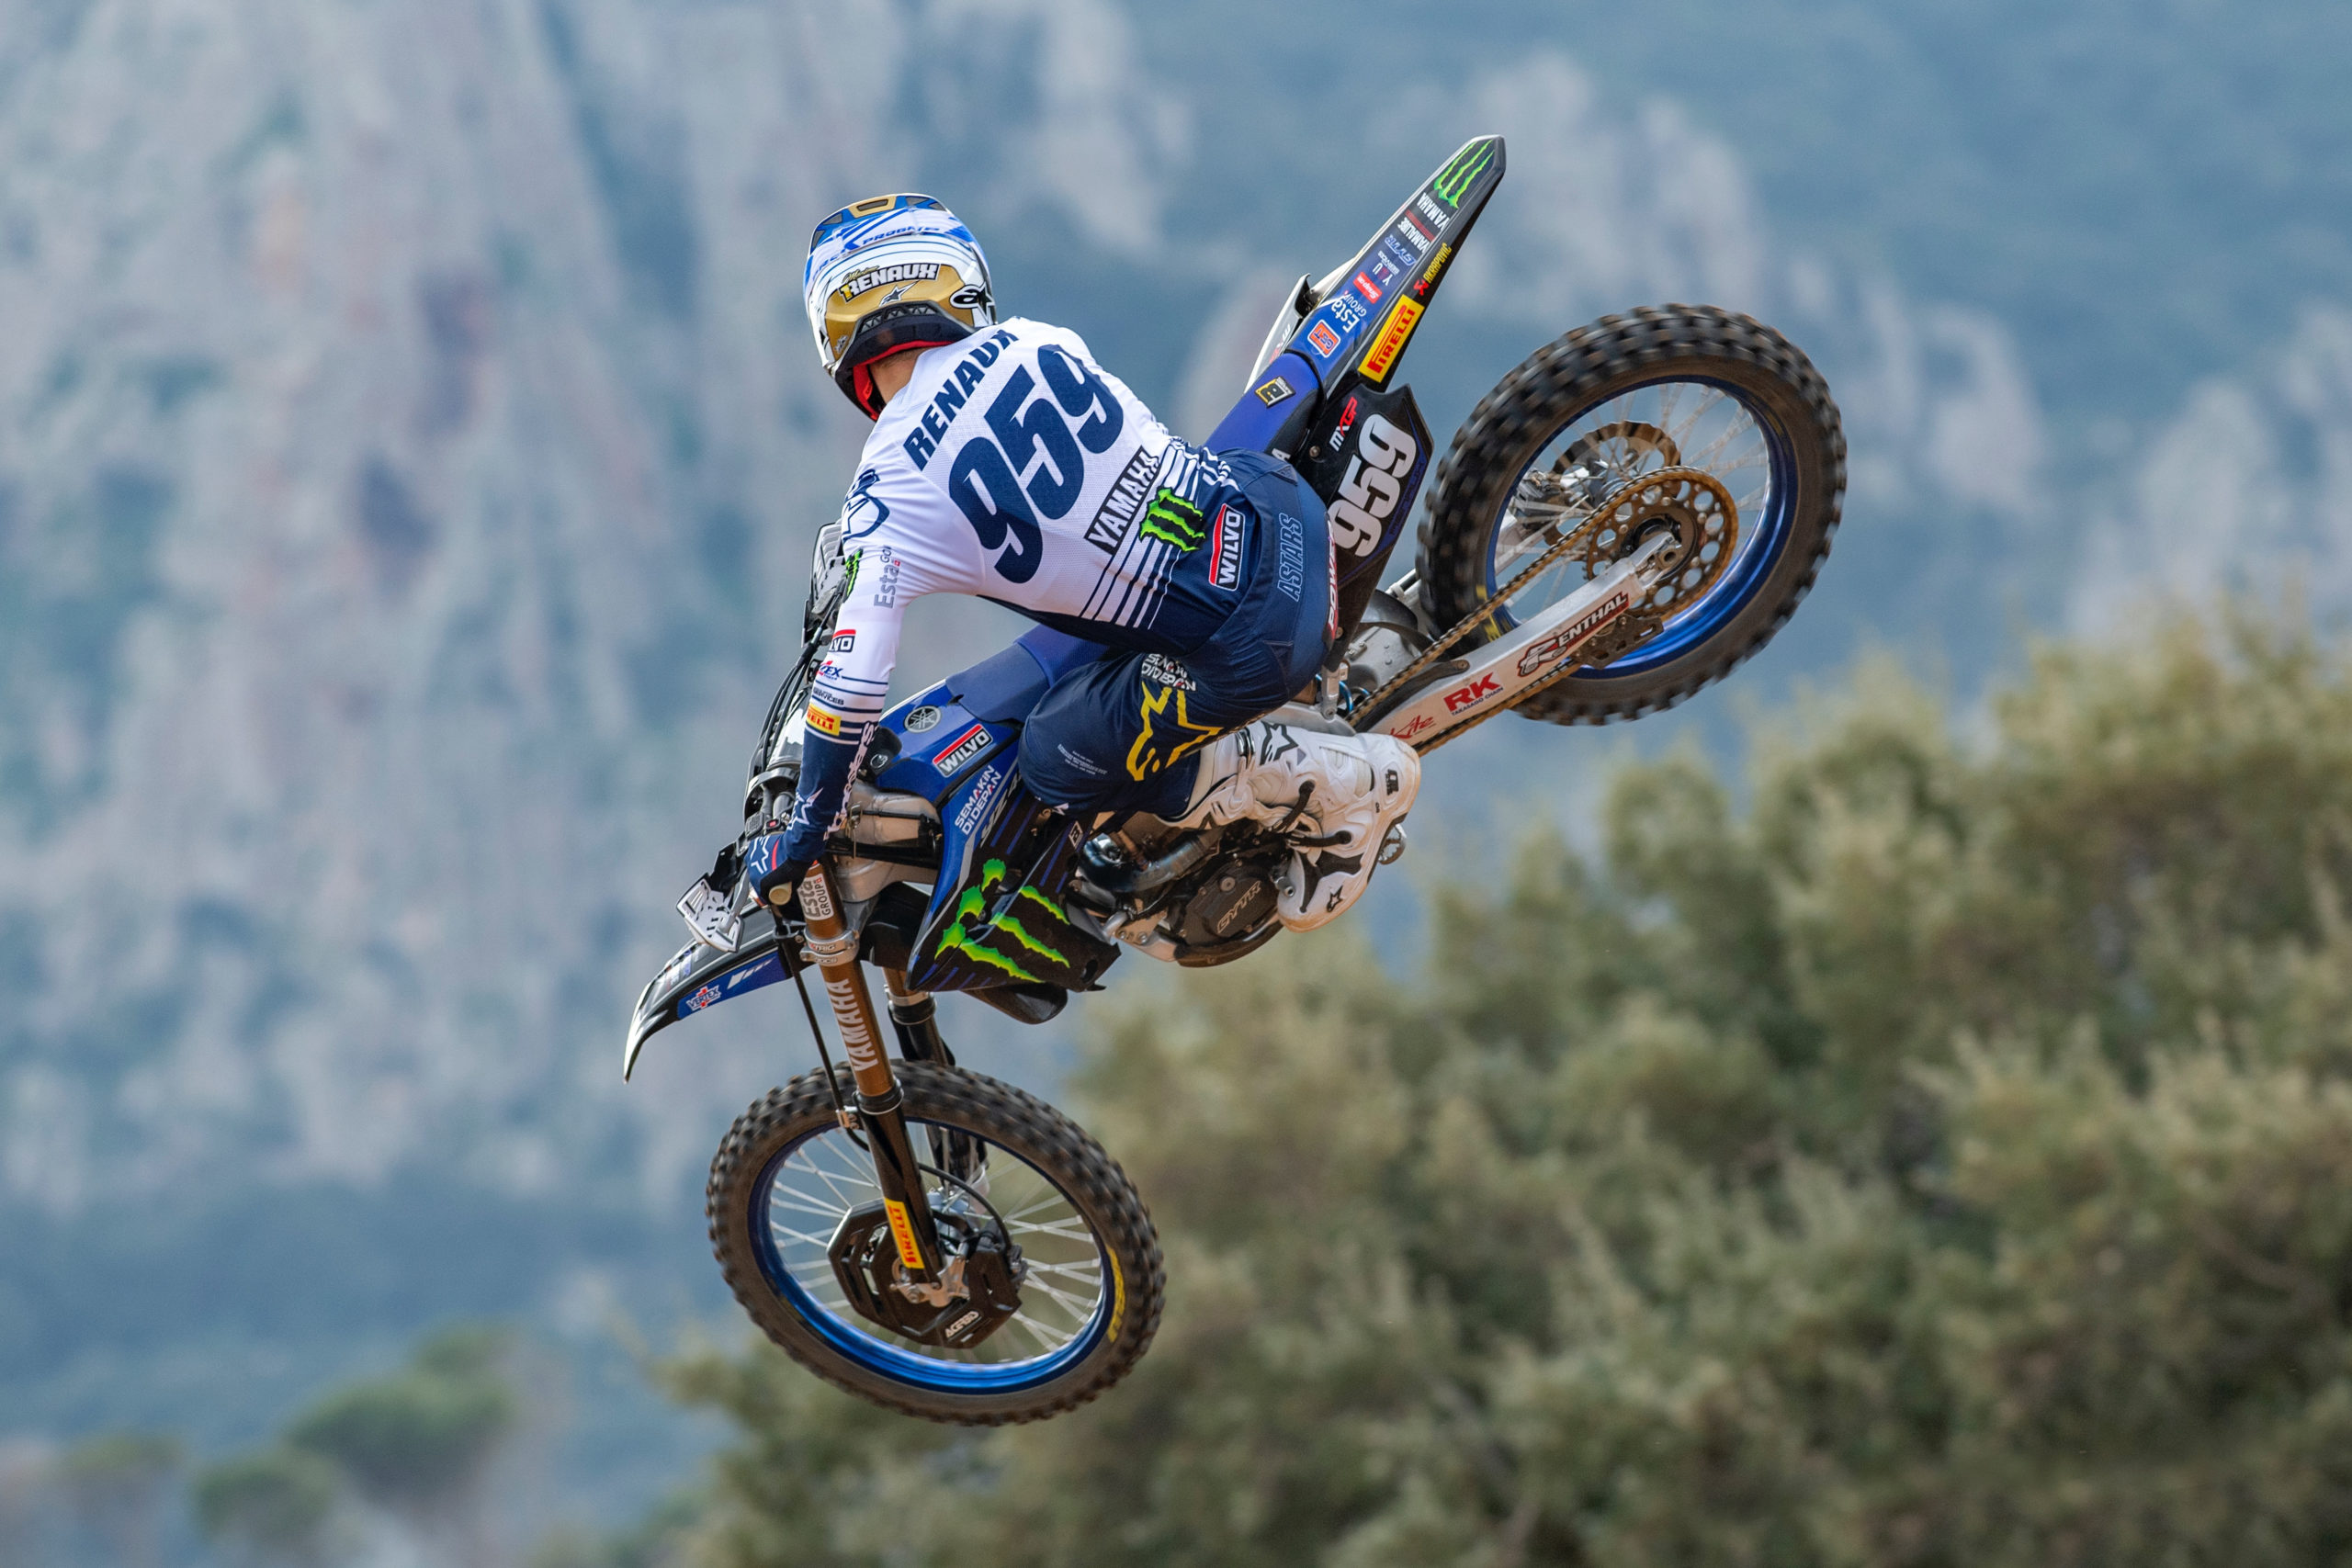 How to Watch and Stream the MXGP of Portugal